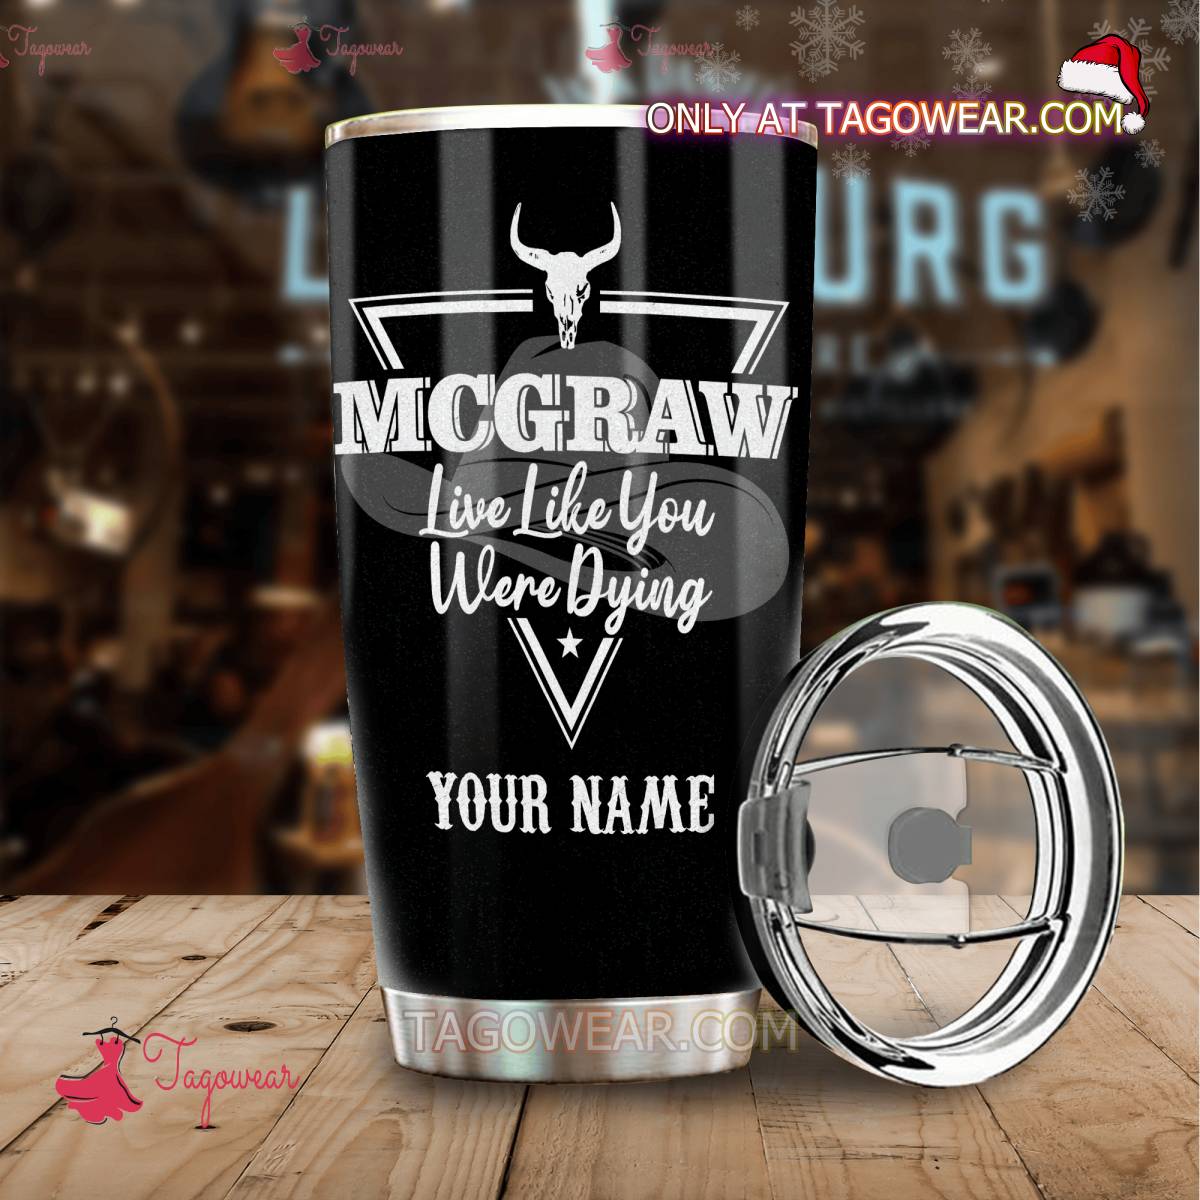 Tim Mcgraw Live Like You Were Dying Personalized Tumbler a